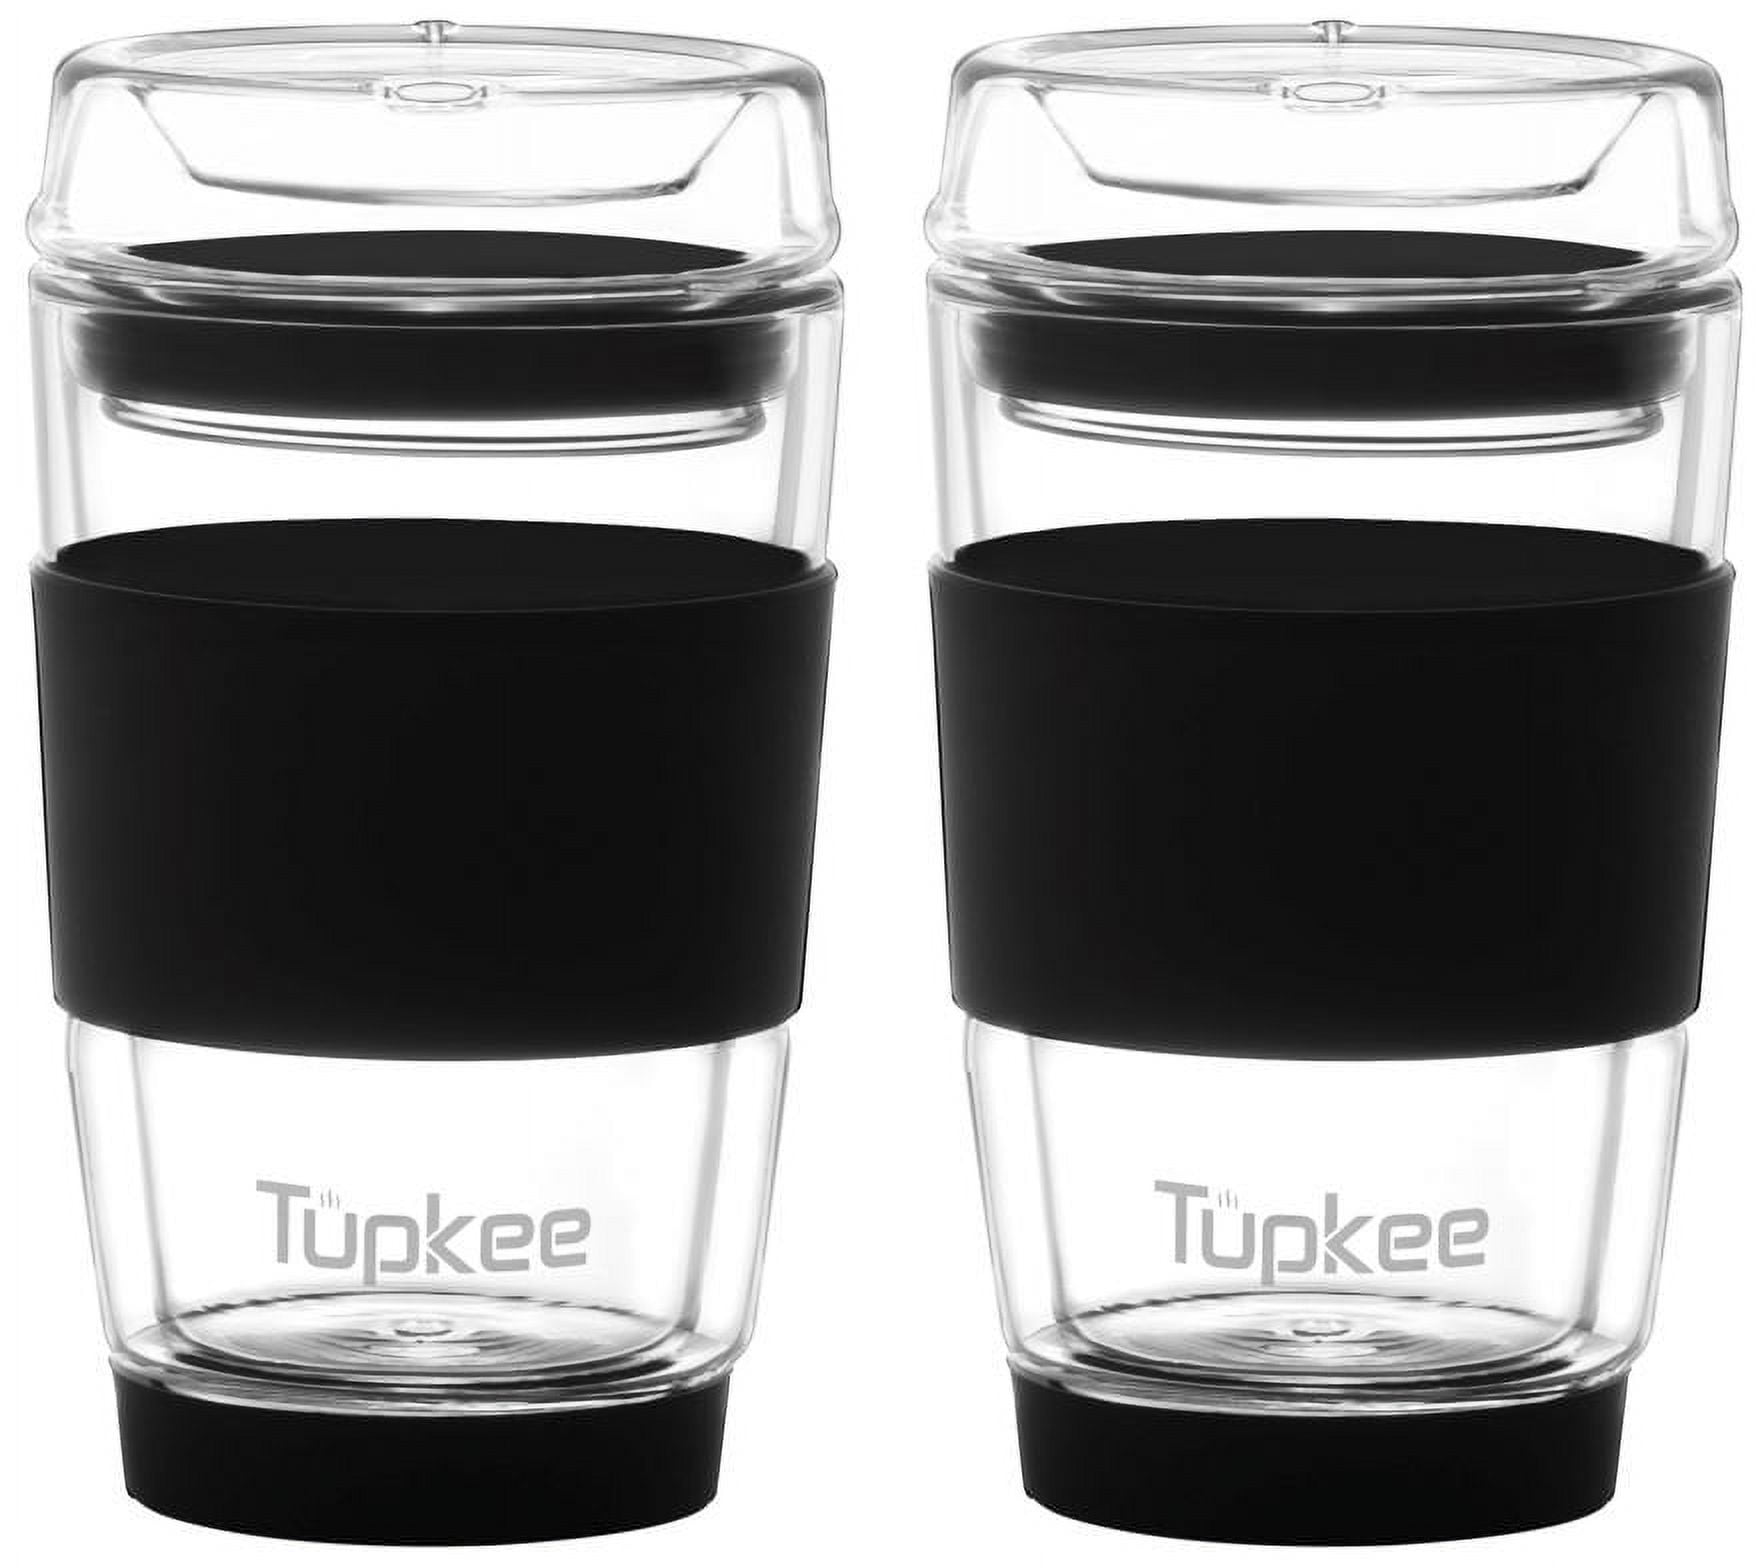 Tupkee Double Wall All Glass Tumbler - Including Lid 